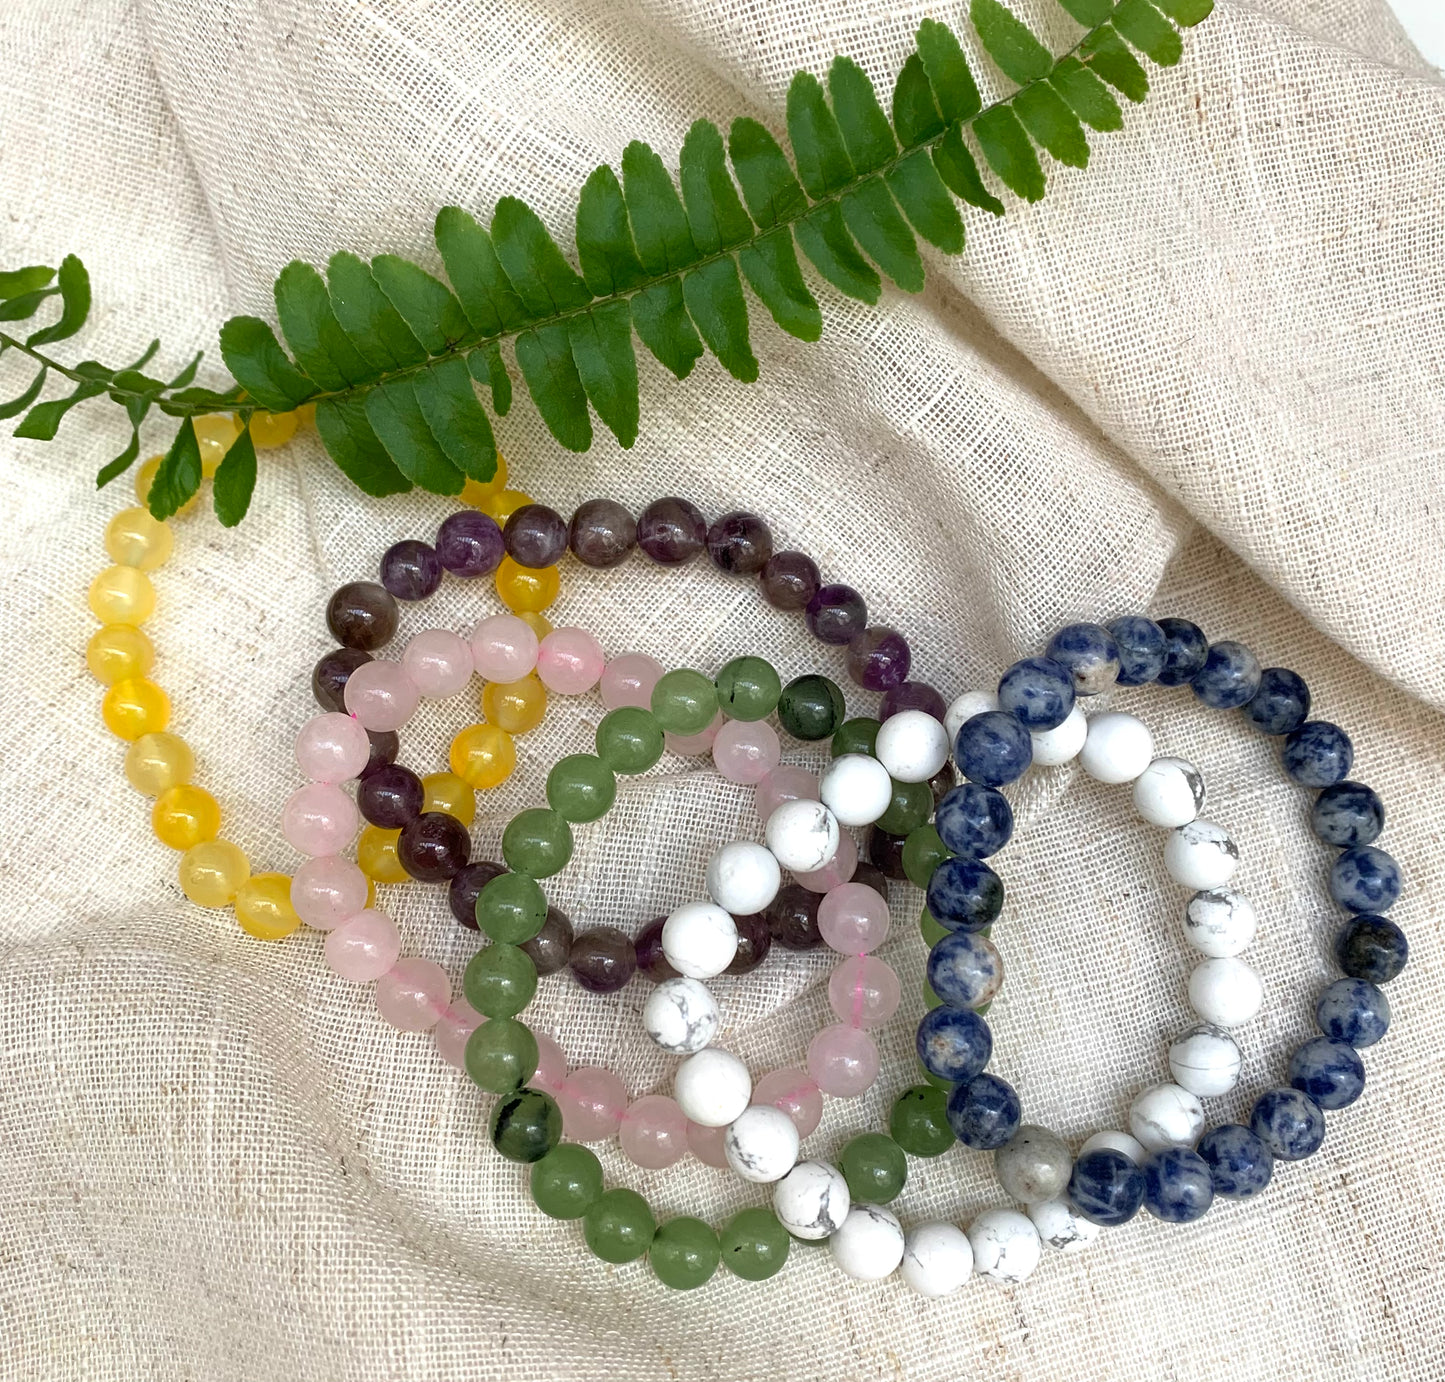 Gemstone Bracelets  £10  Beautiful elasticated bracelet with smooth rounded stones  Each gemstone carries different properties.  Amethyst, Honey Crystal, Jade, Rose Quartz, Sodalite, White Jasper  This is a fairly traded product.